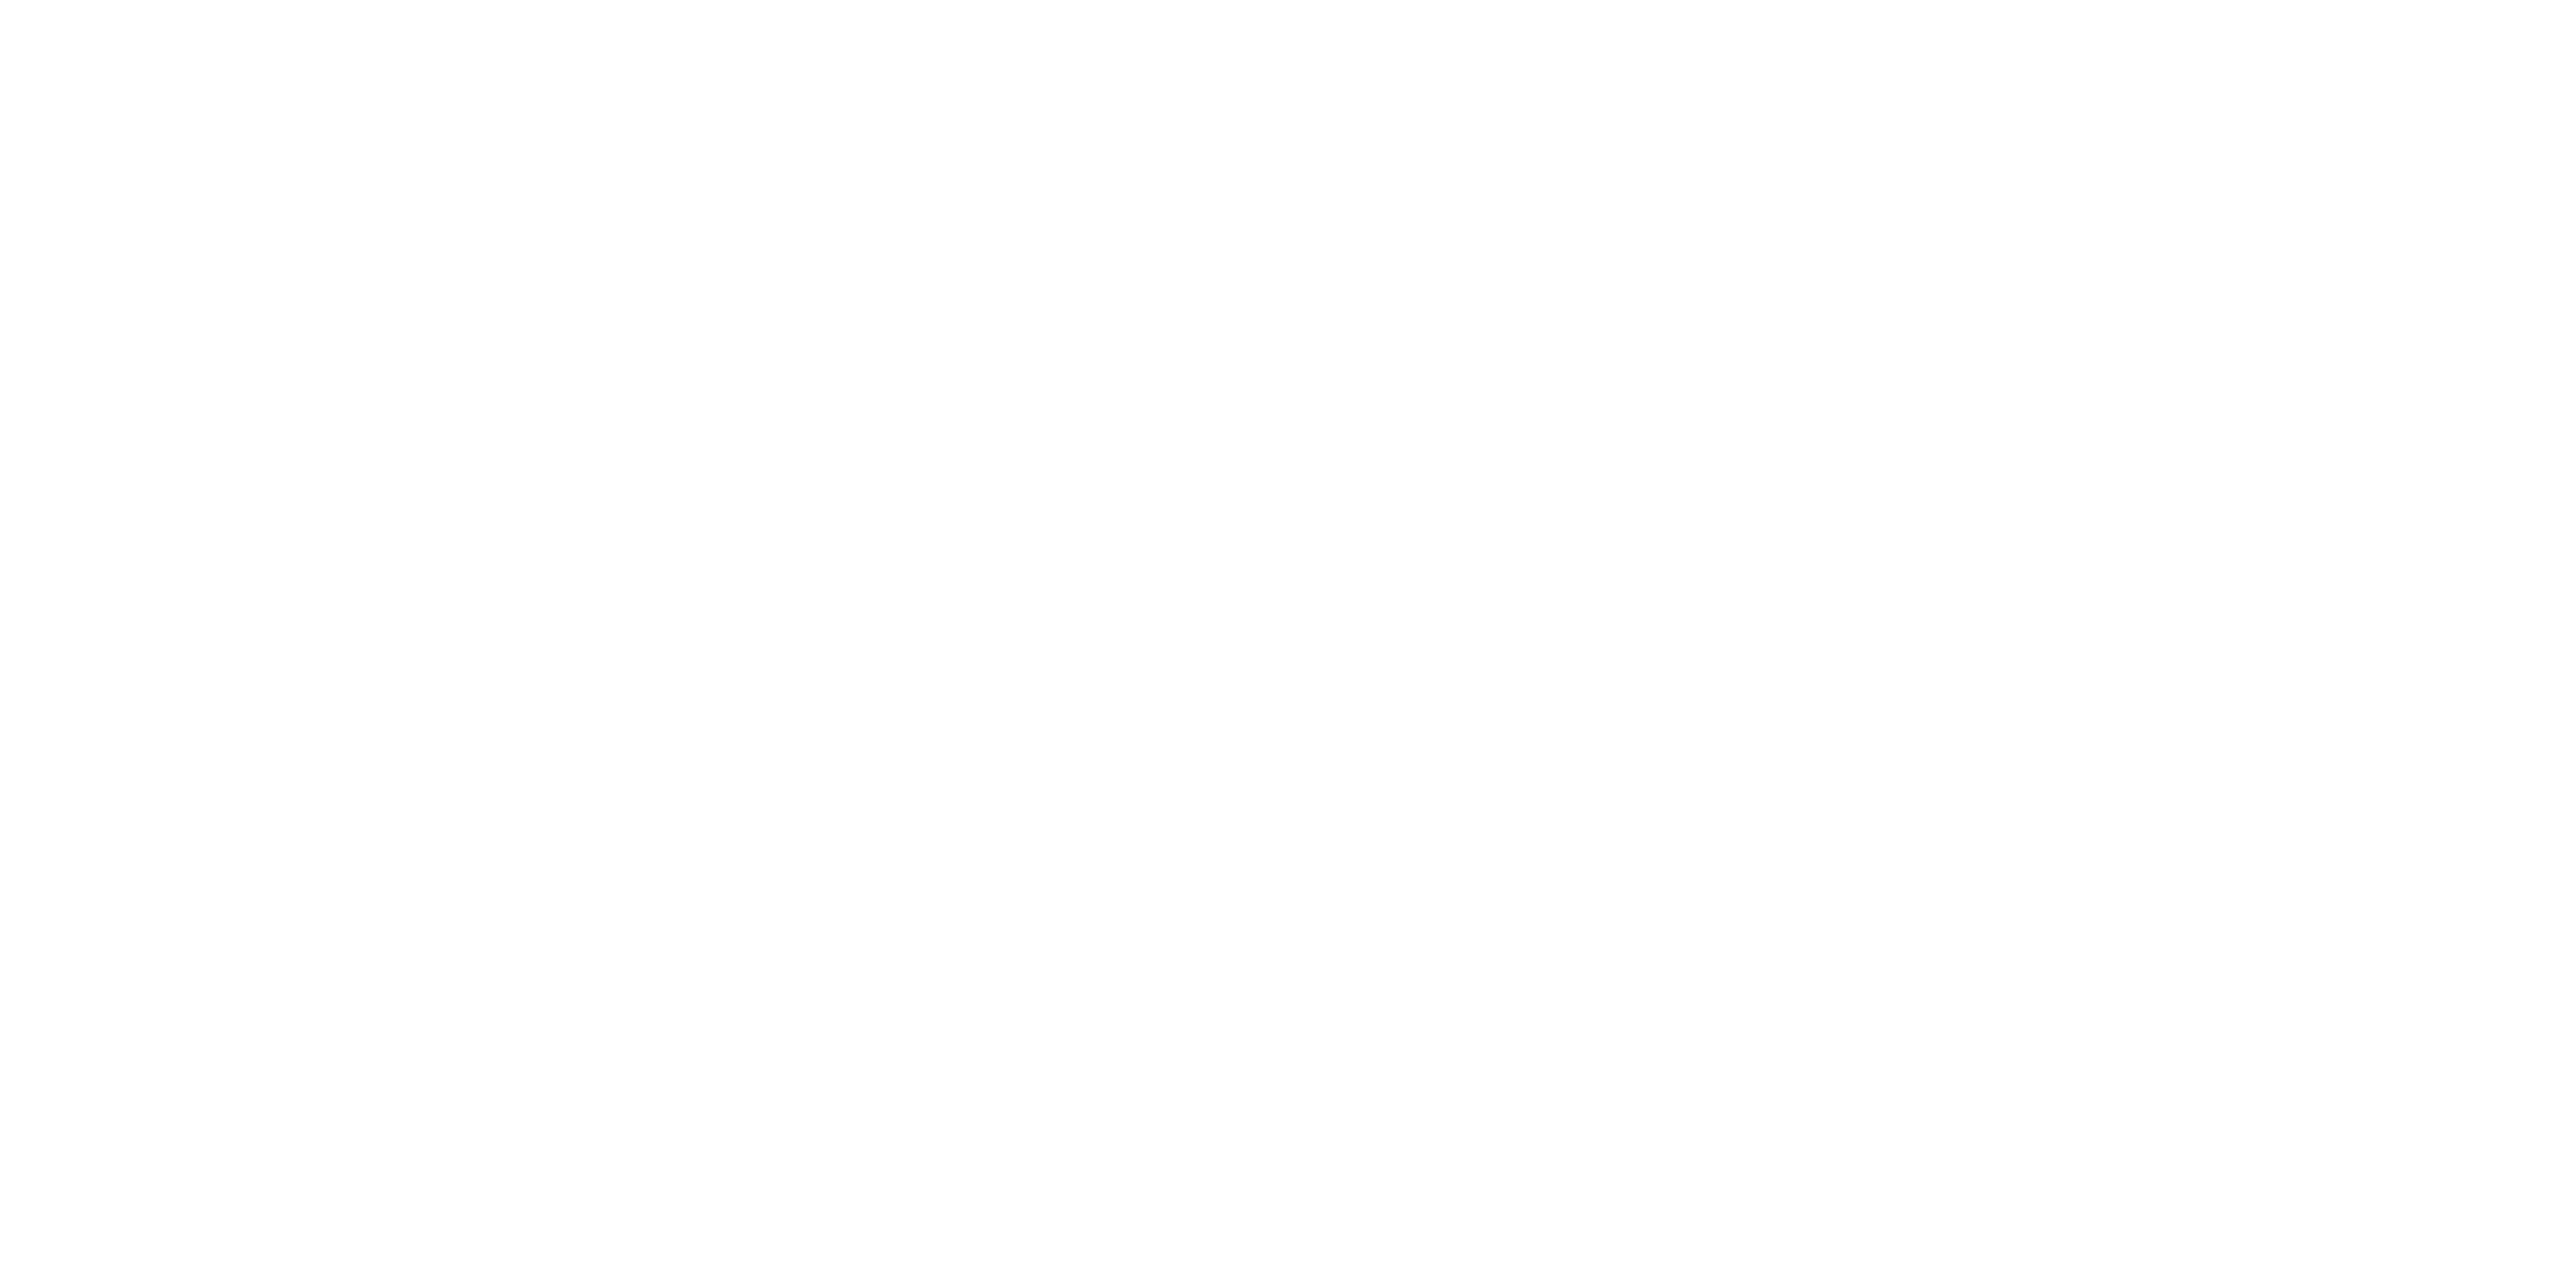 Exit Wounds logo